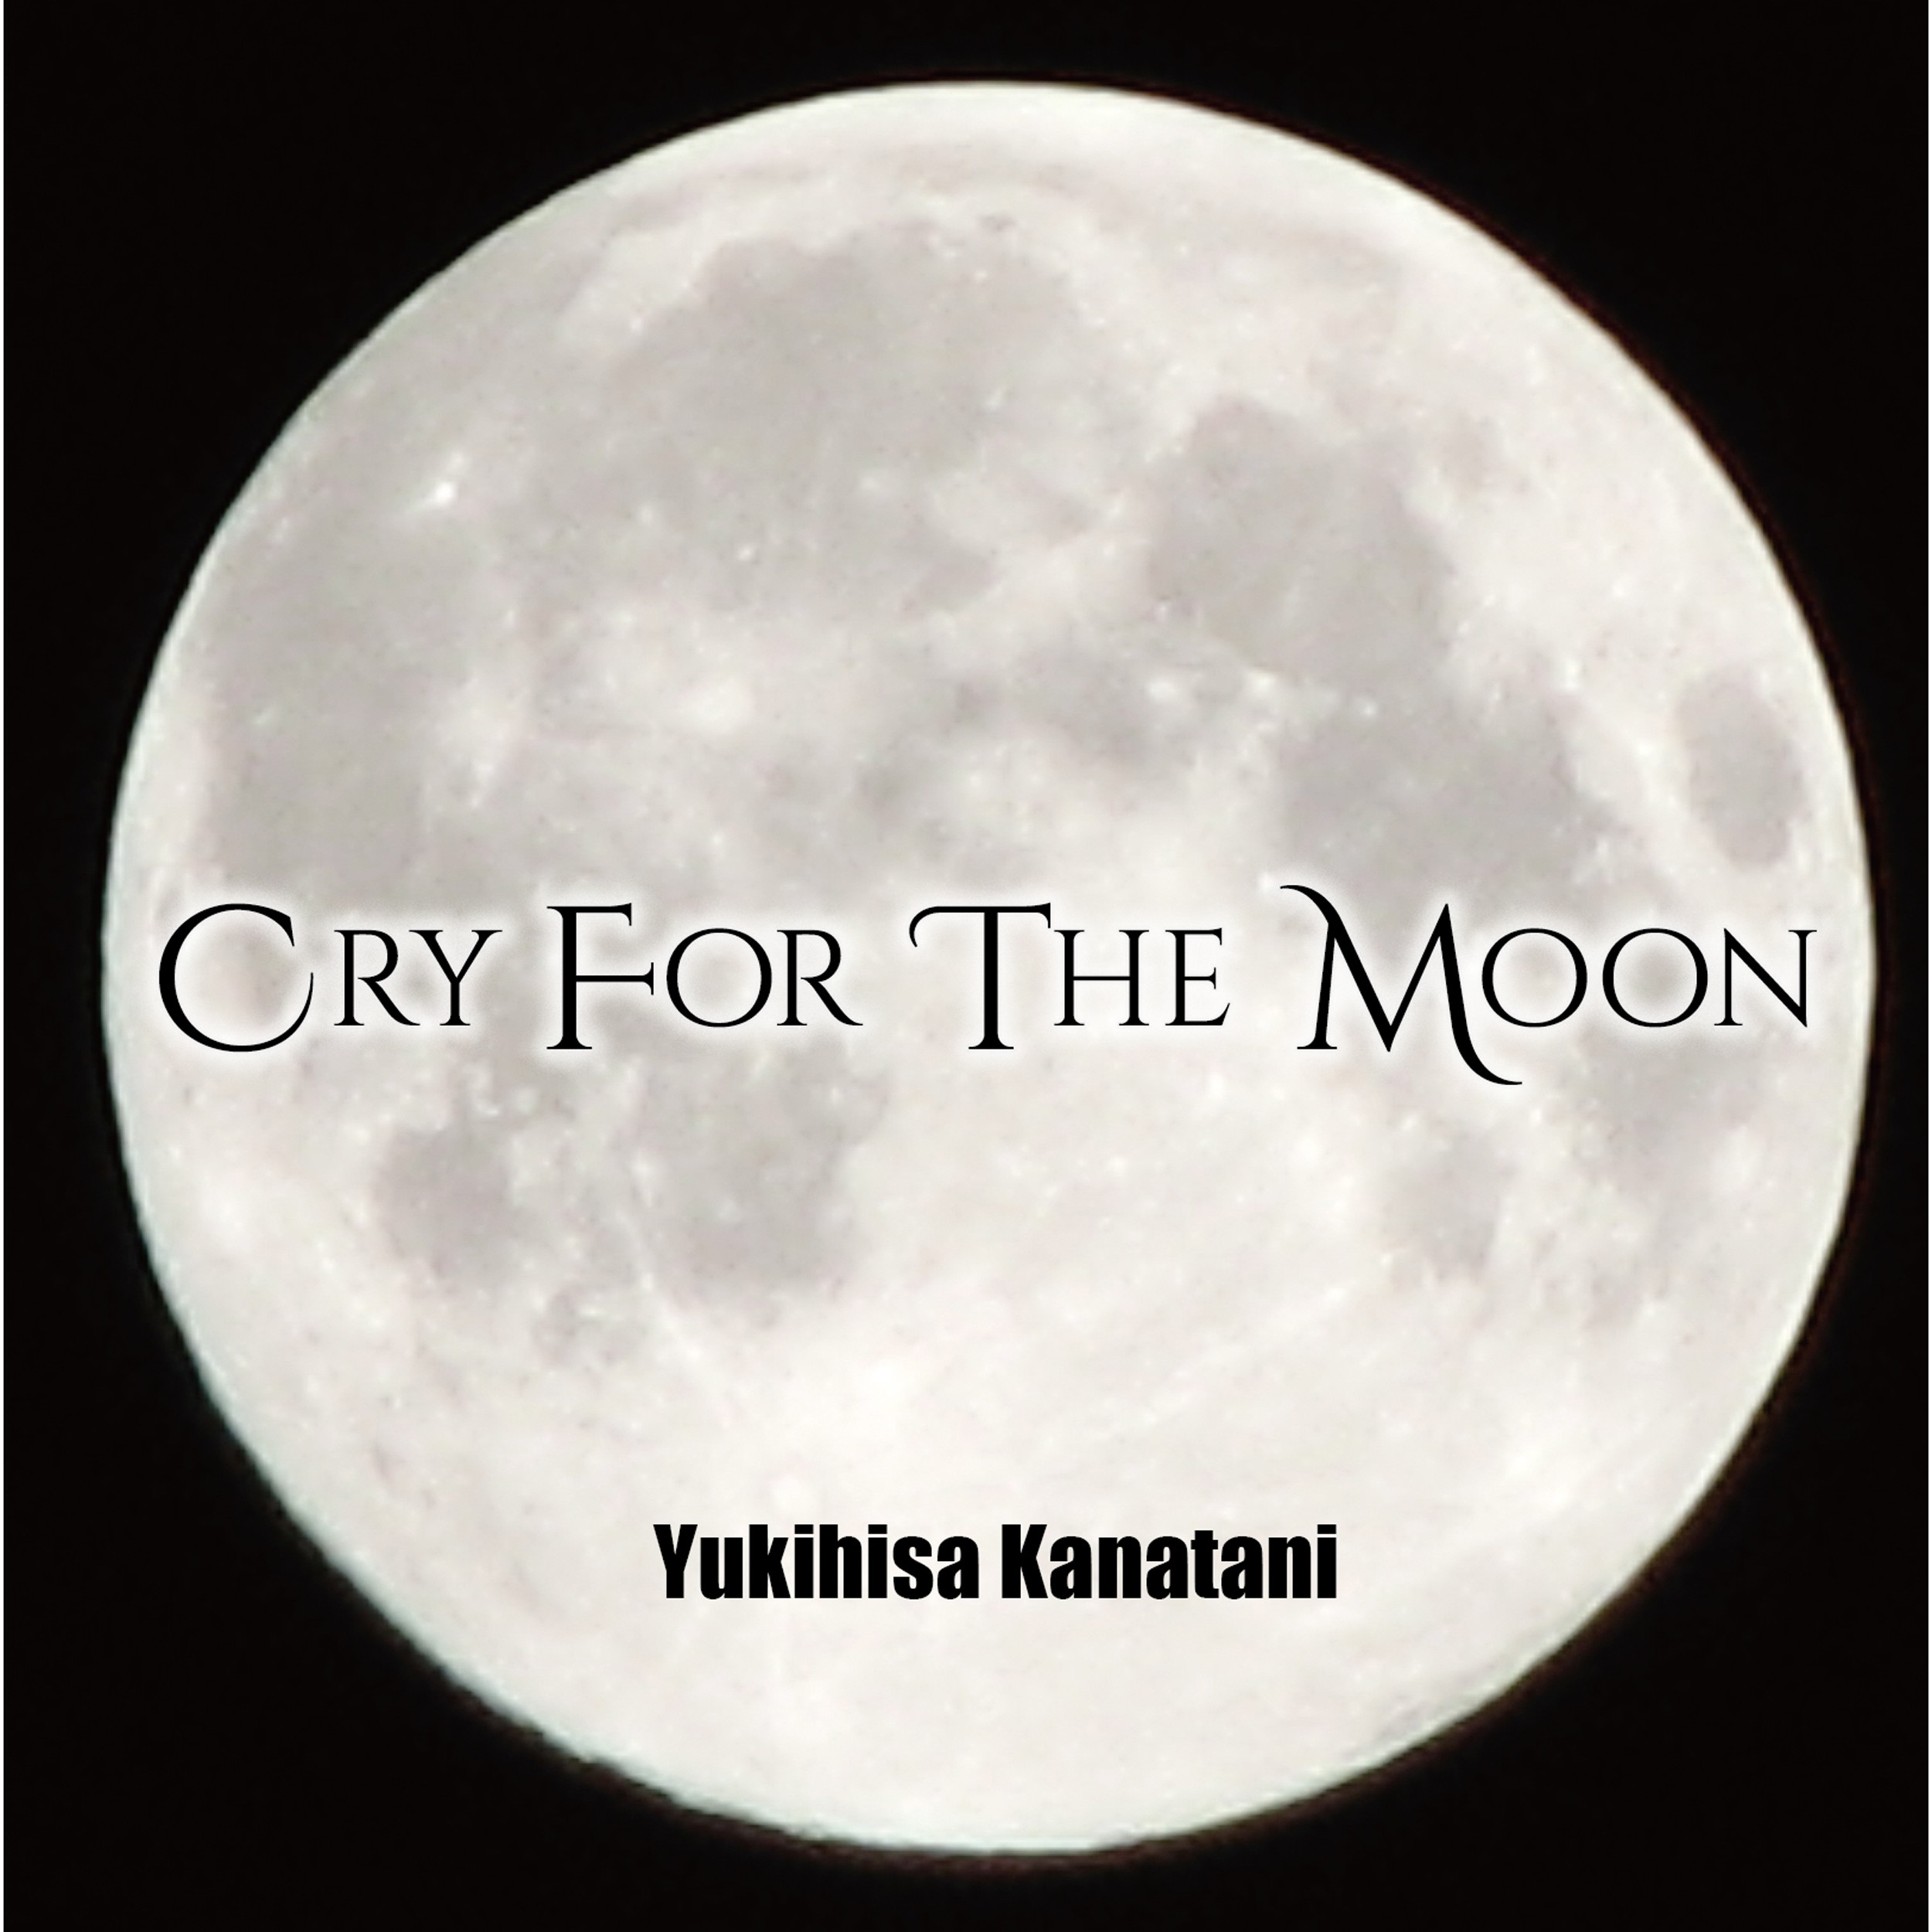 Cry for the Moon. Moon группа. Cry for the Moon идиома. To ask for the Moon идиома.